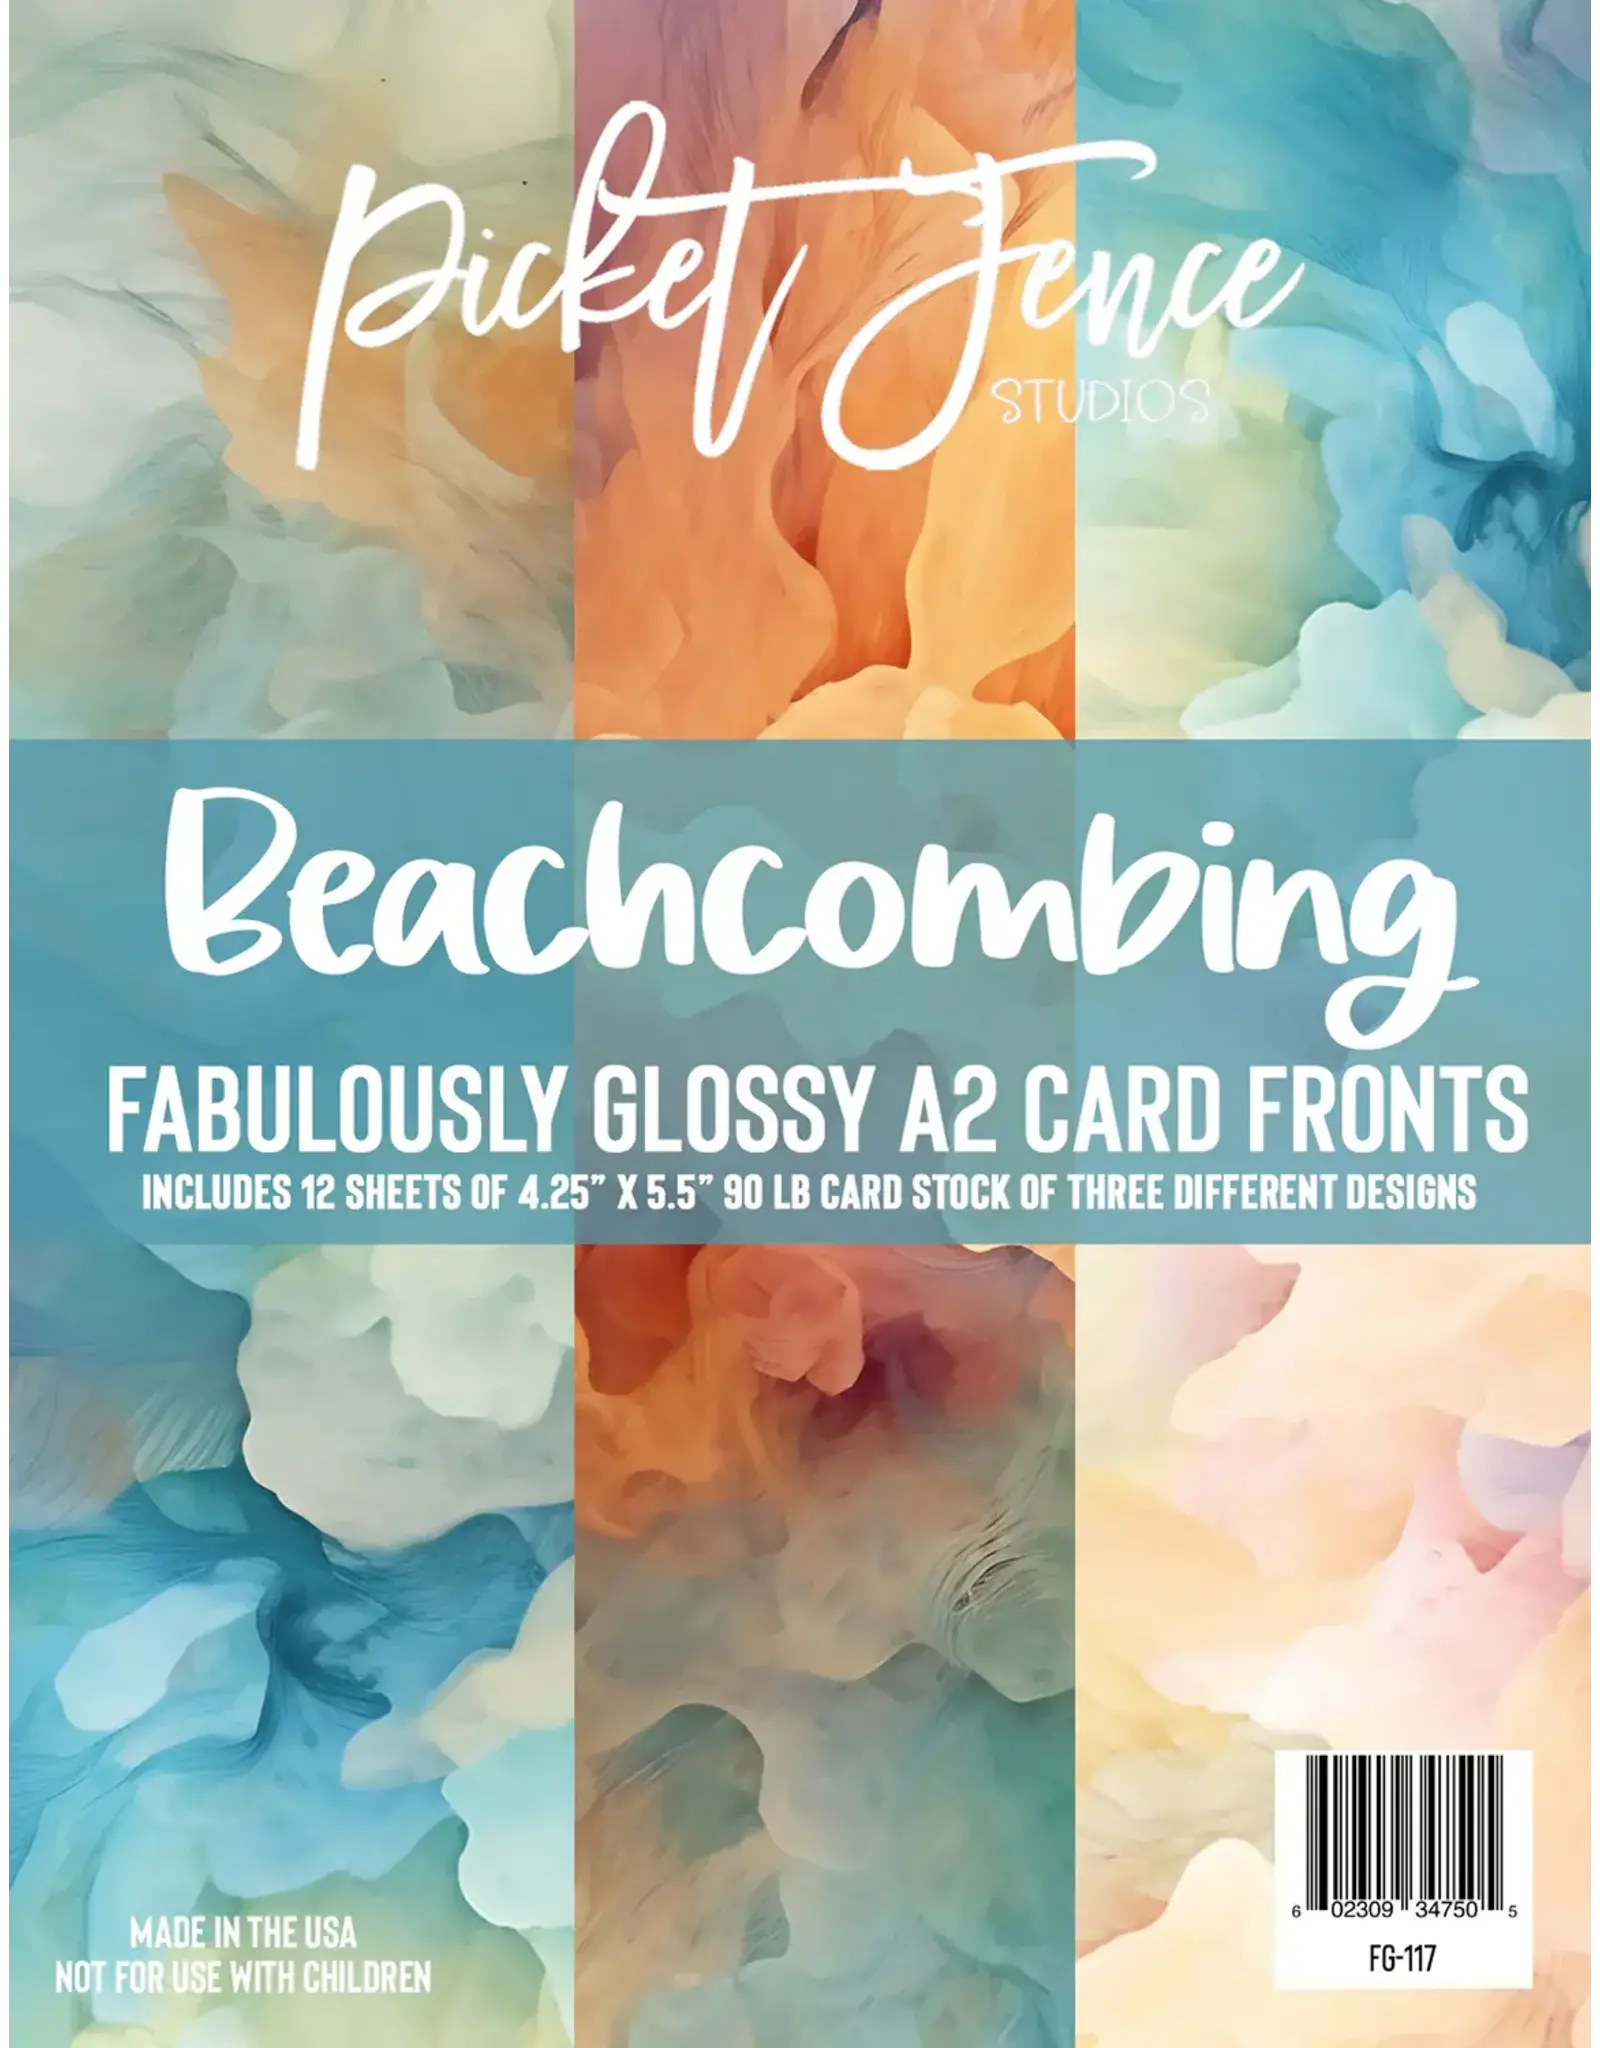 PICKET FENCE PICKET FENCE STUDIOS BEACHCOMBING FABULOUSLY GLOSSY A2 CARD FRONTS